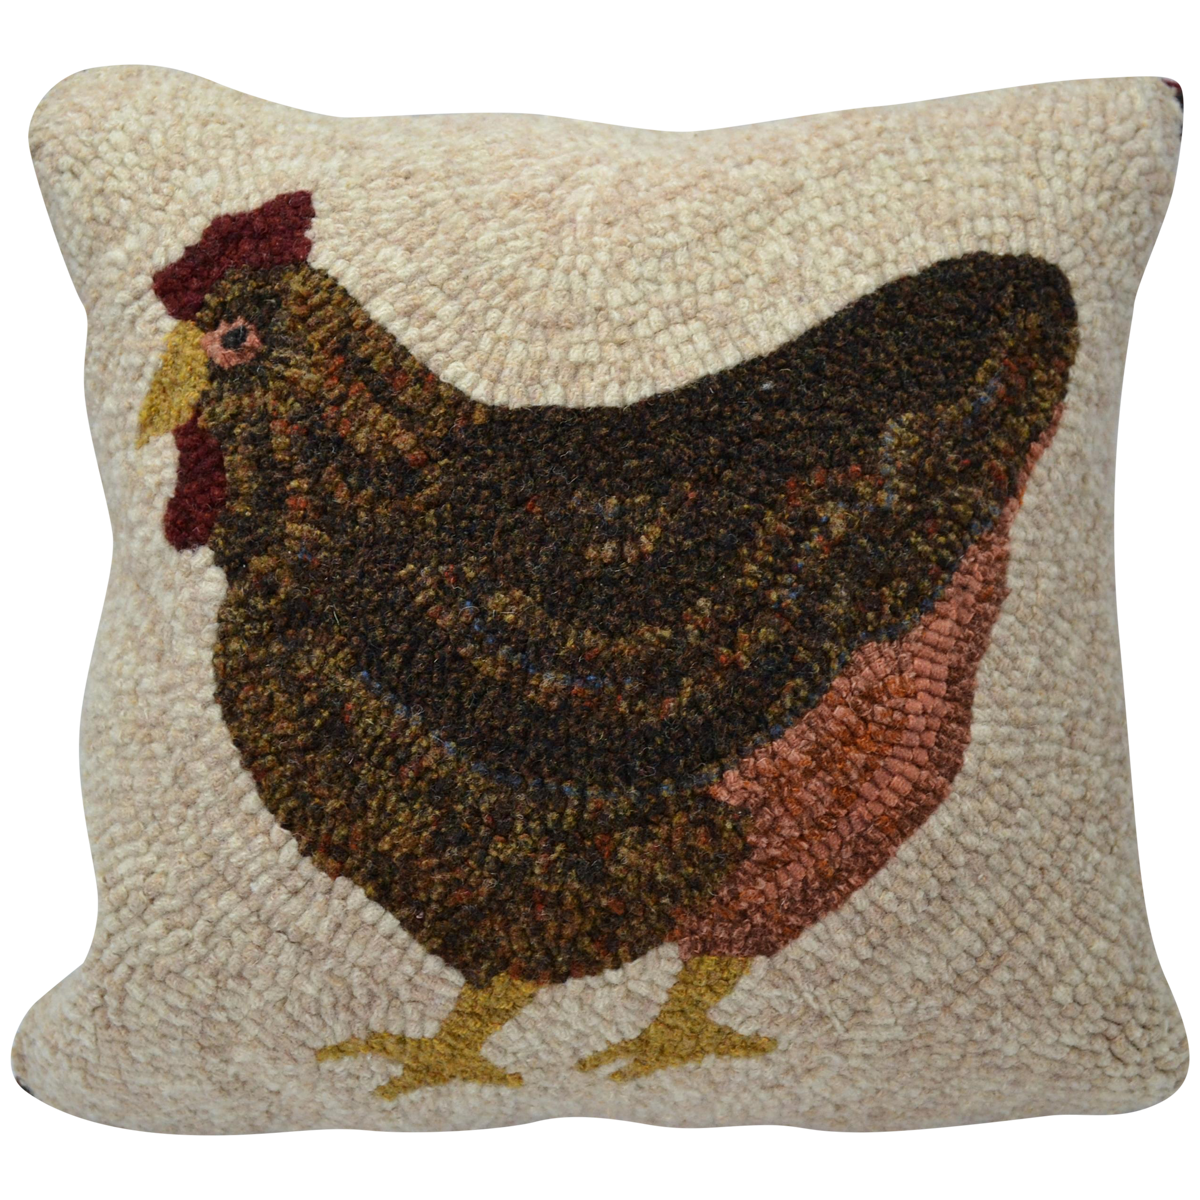 Laying Hen Hooked Decor Pillow